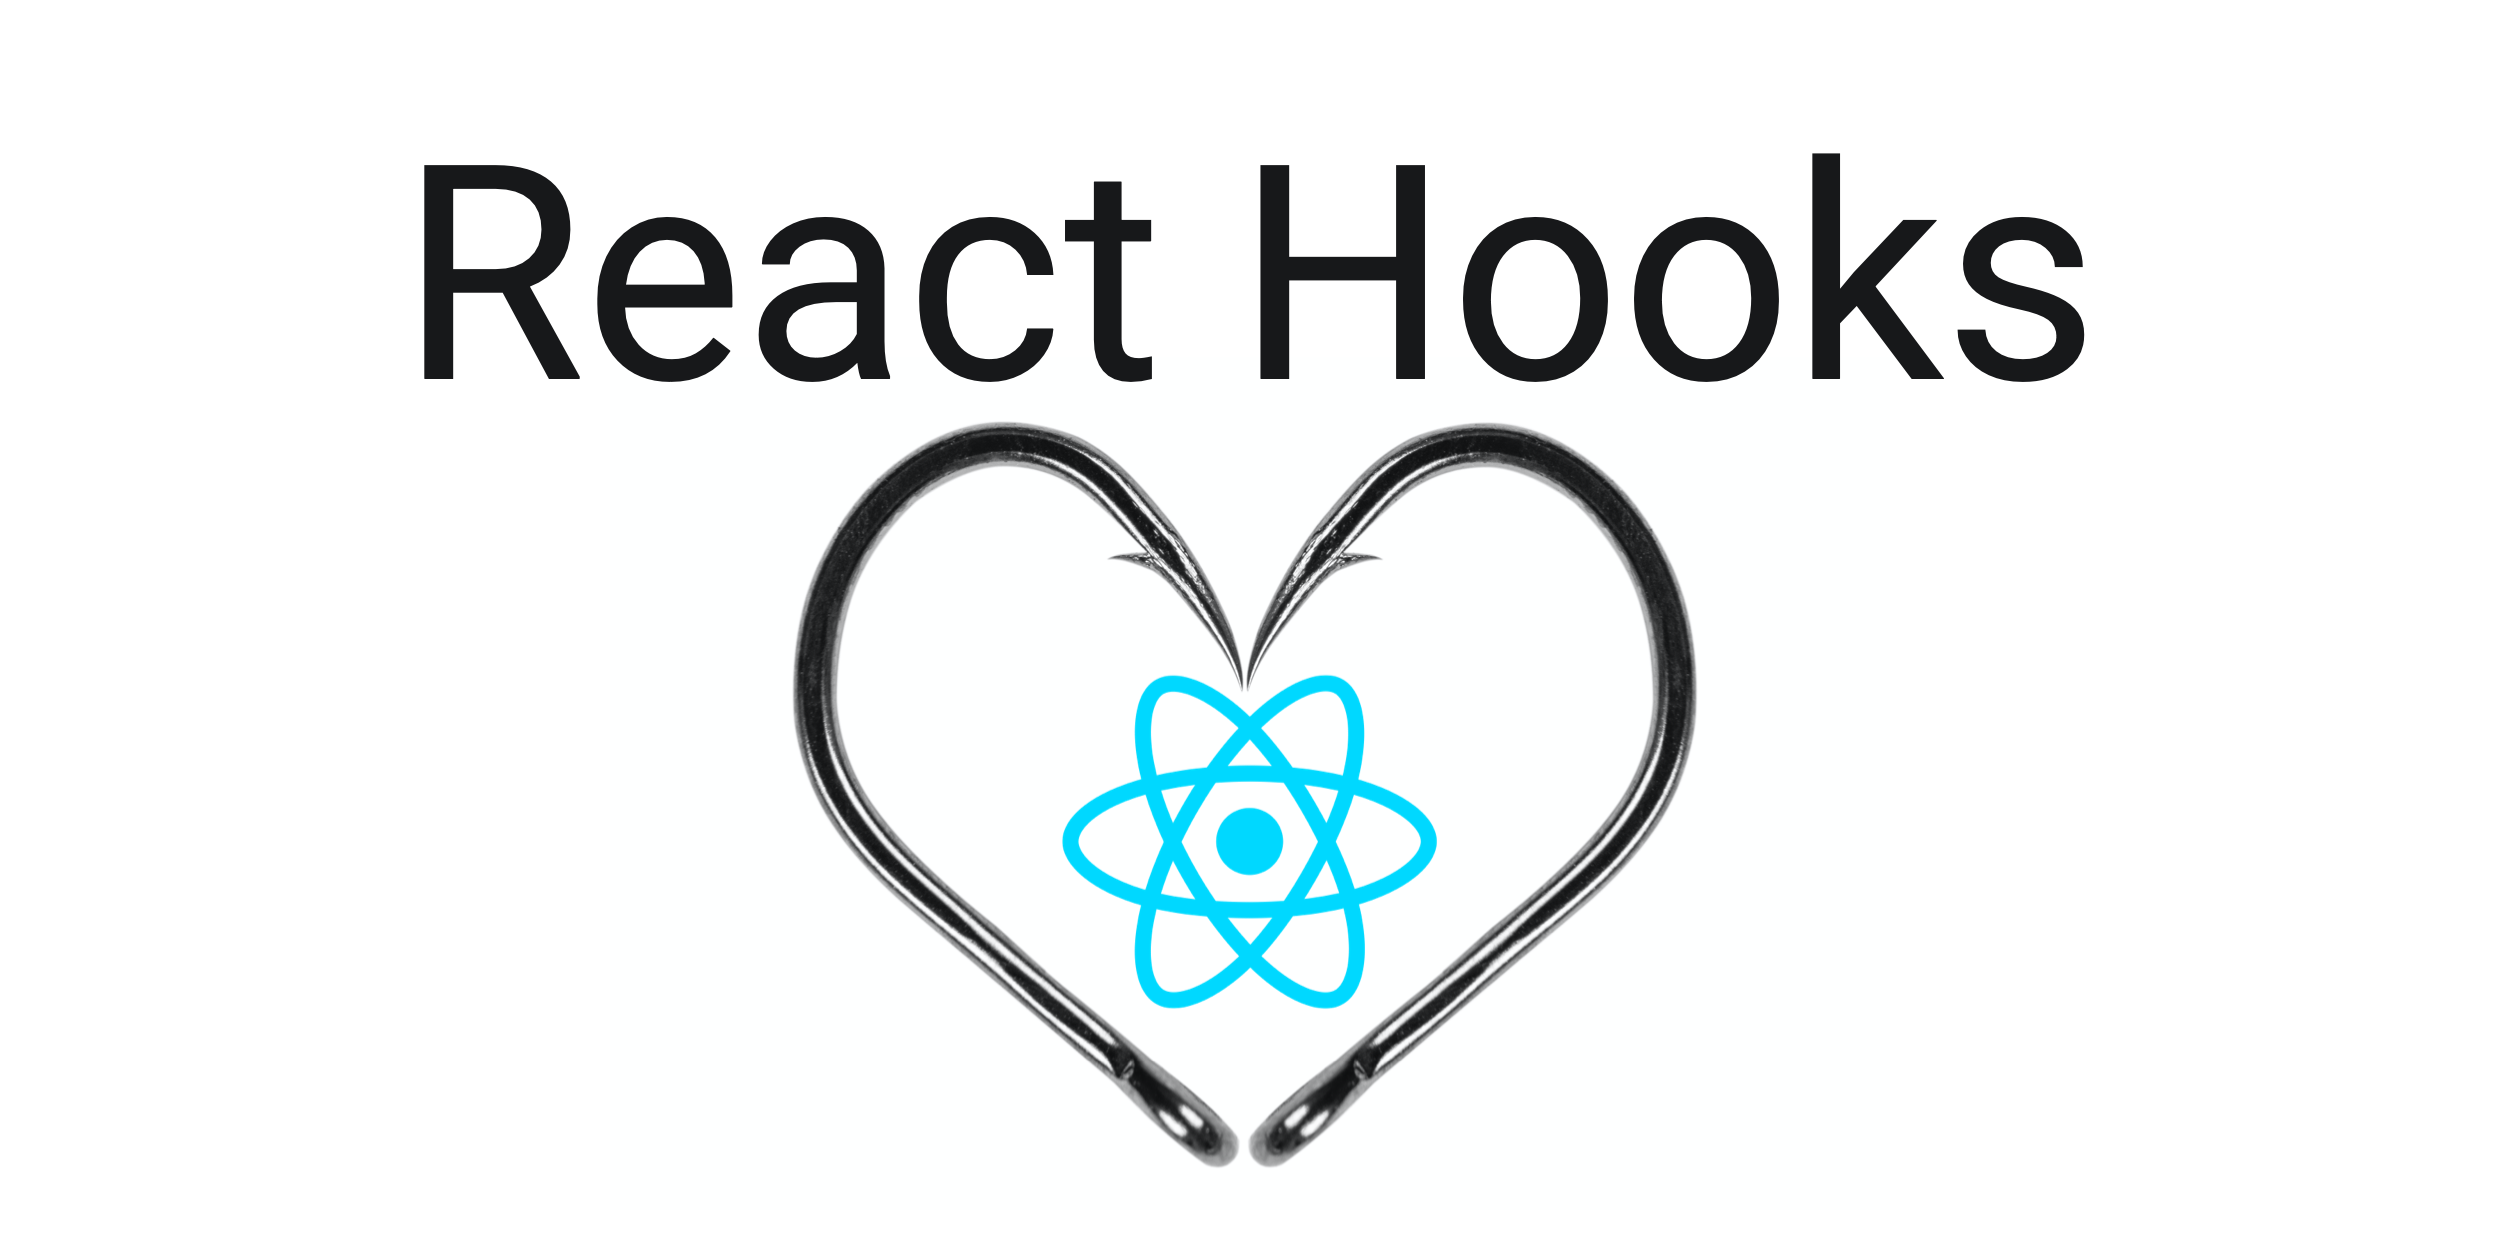 Build a Simple React Application Using Hooks